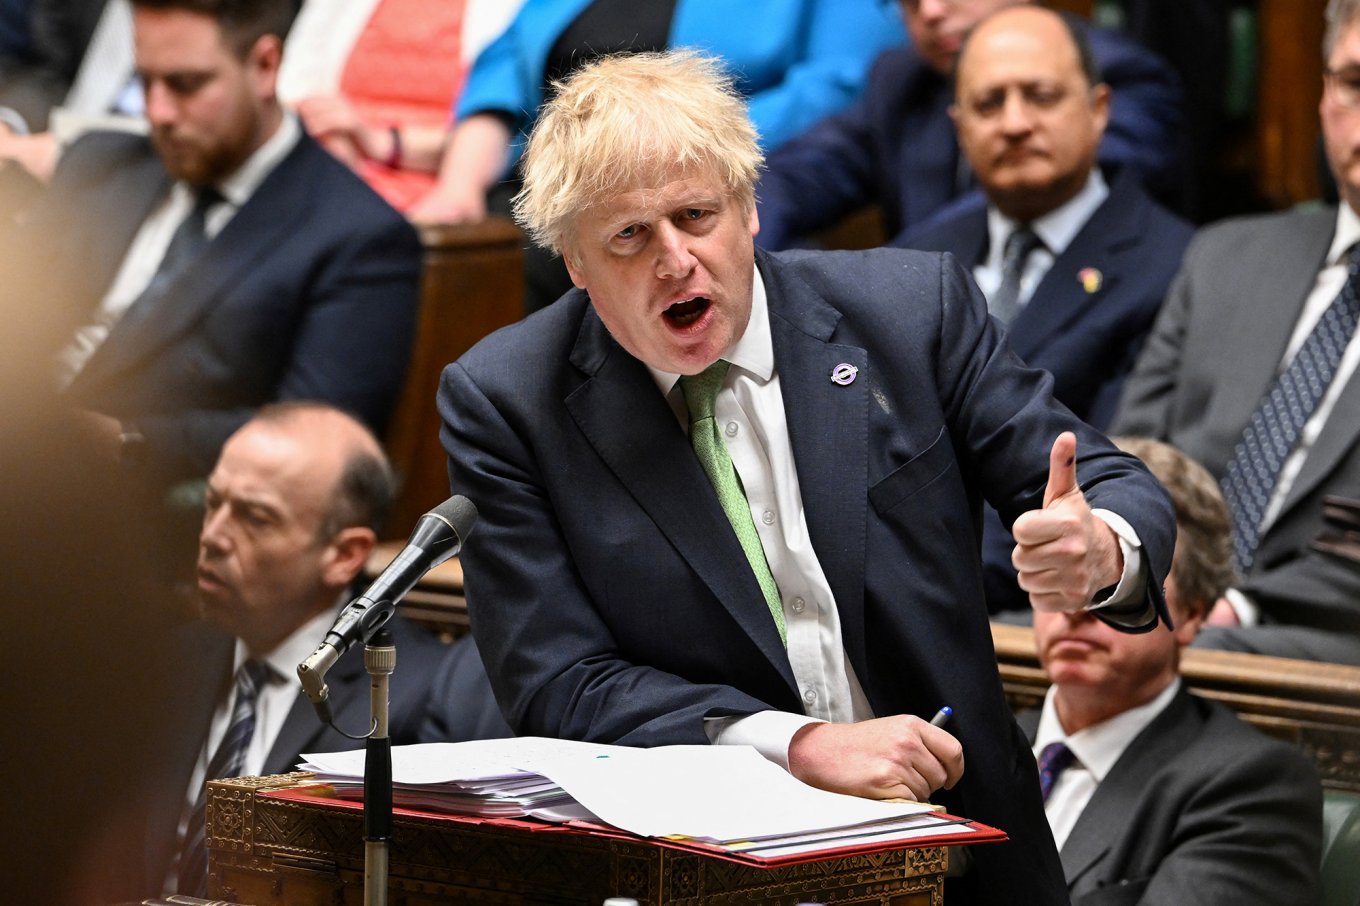 British Prime Minister Boris Johnson speaks as he takes questions at the House of Commons, in London, England, on May 18. (Jessica Taylor/UK Parliament/Reuters)